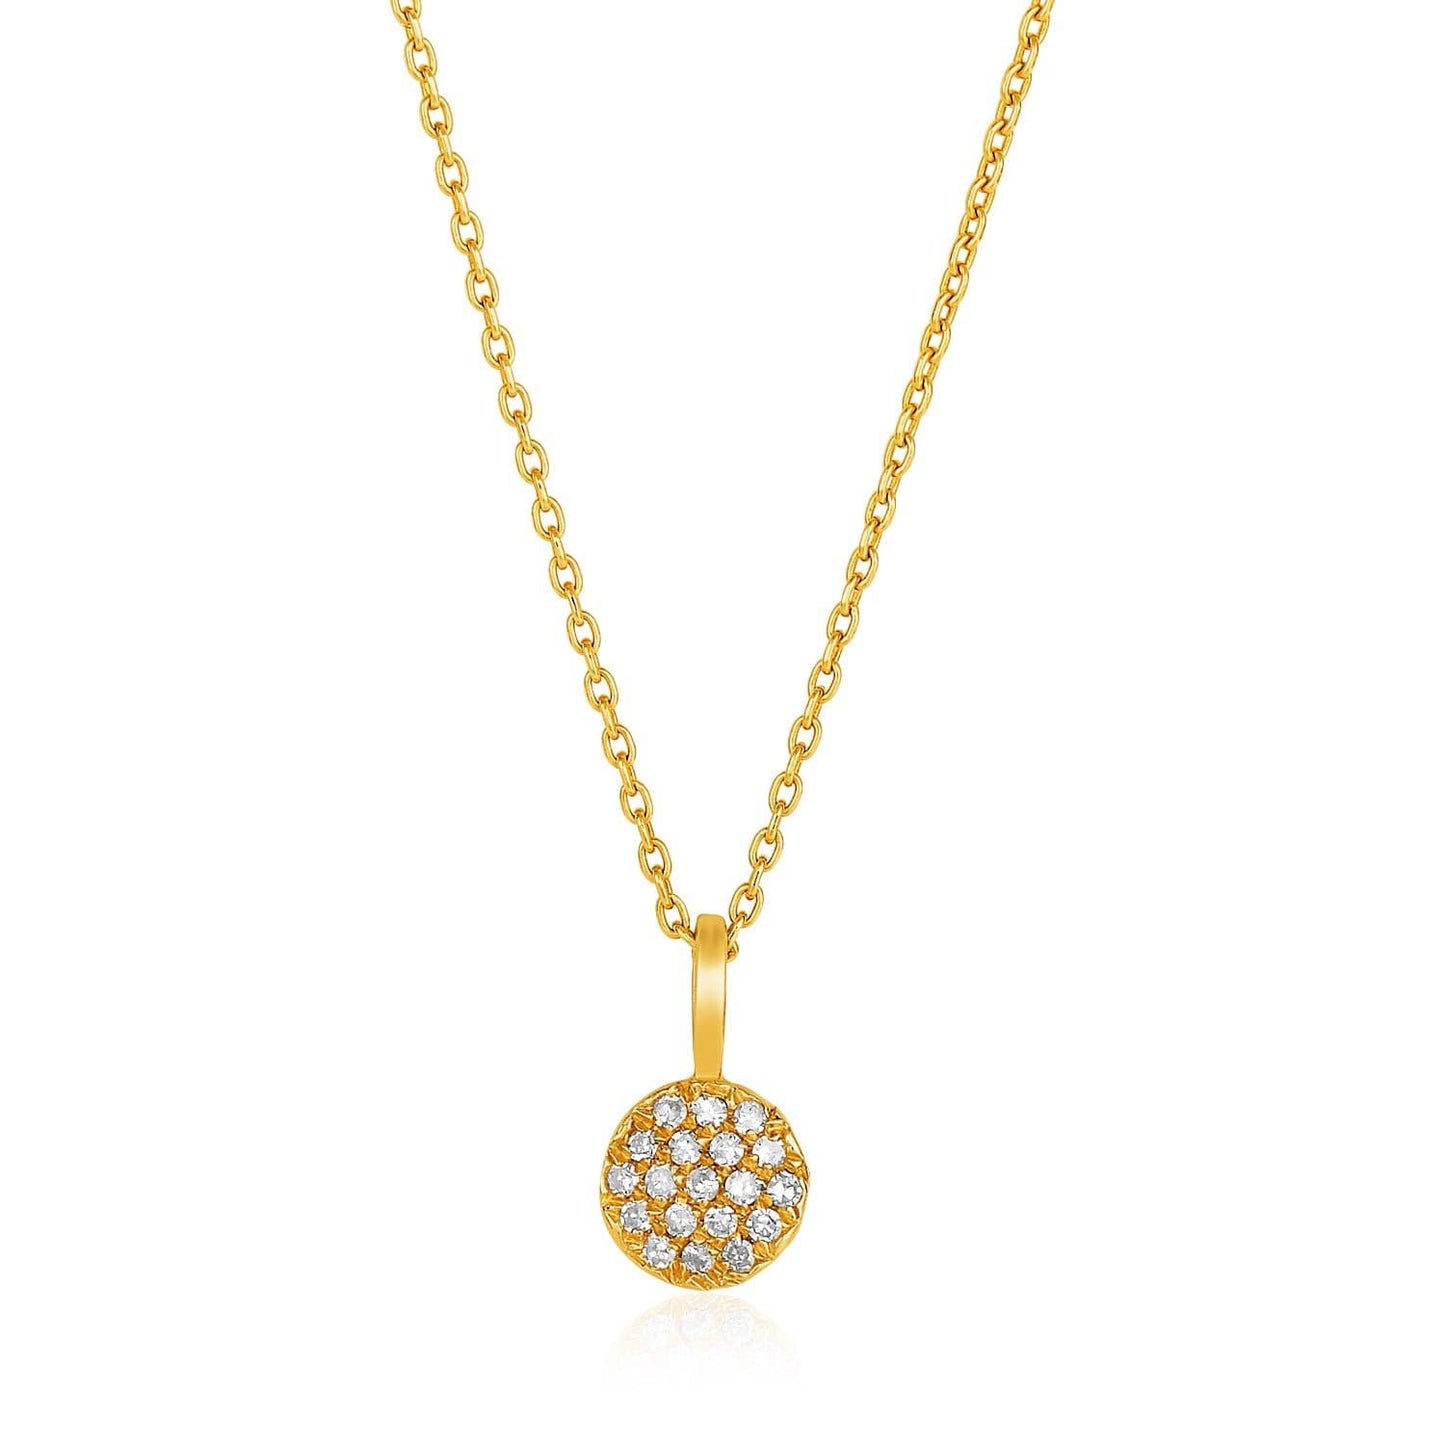 14K Yellow Gold 16 inch Necklace with Gold and Diamond Circle Pendant (1/10 ct. tw.)